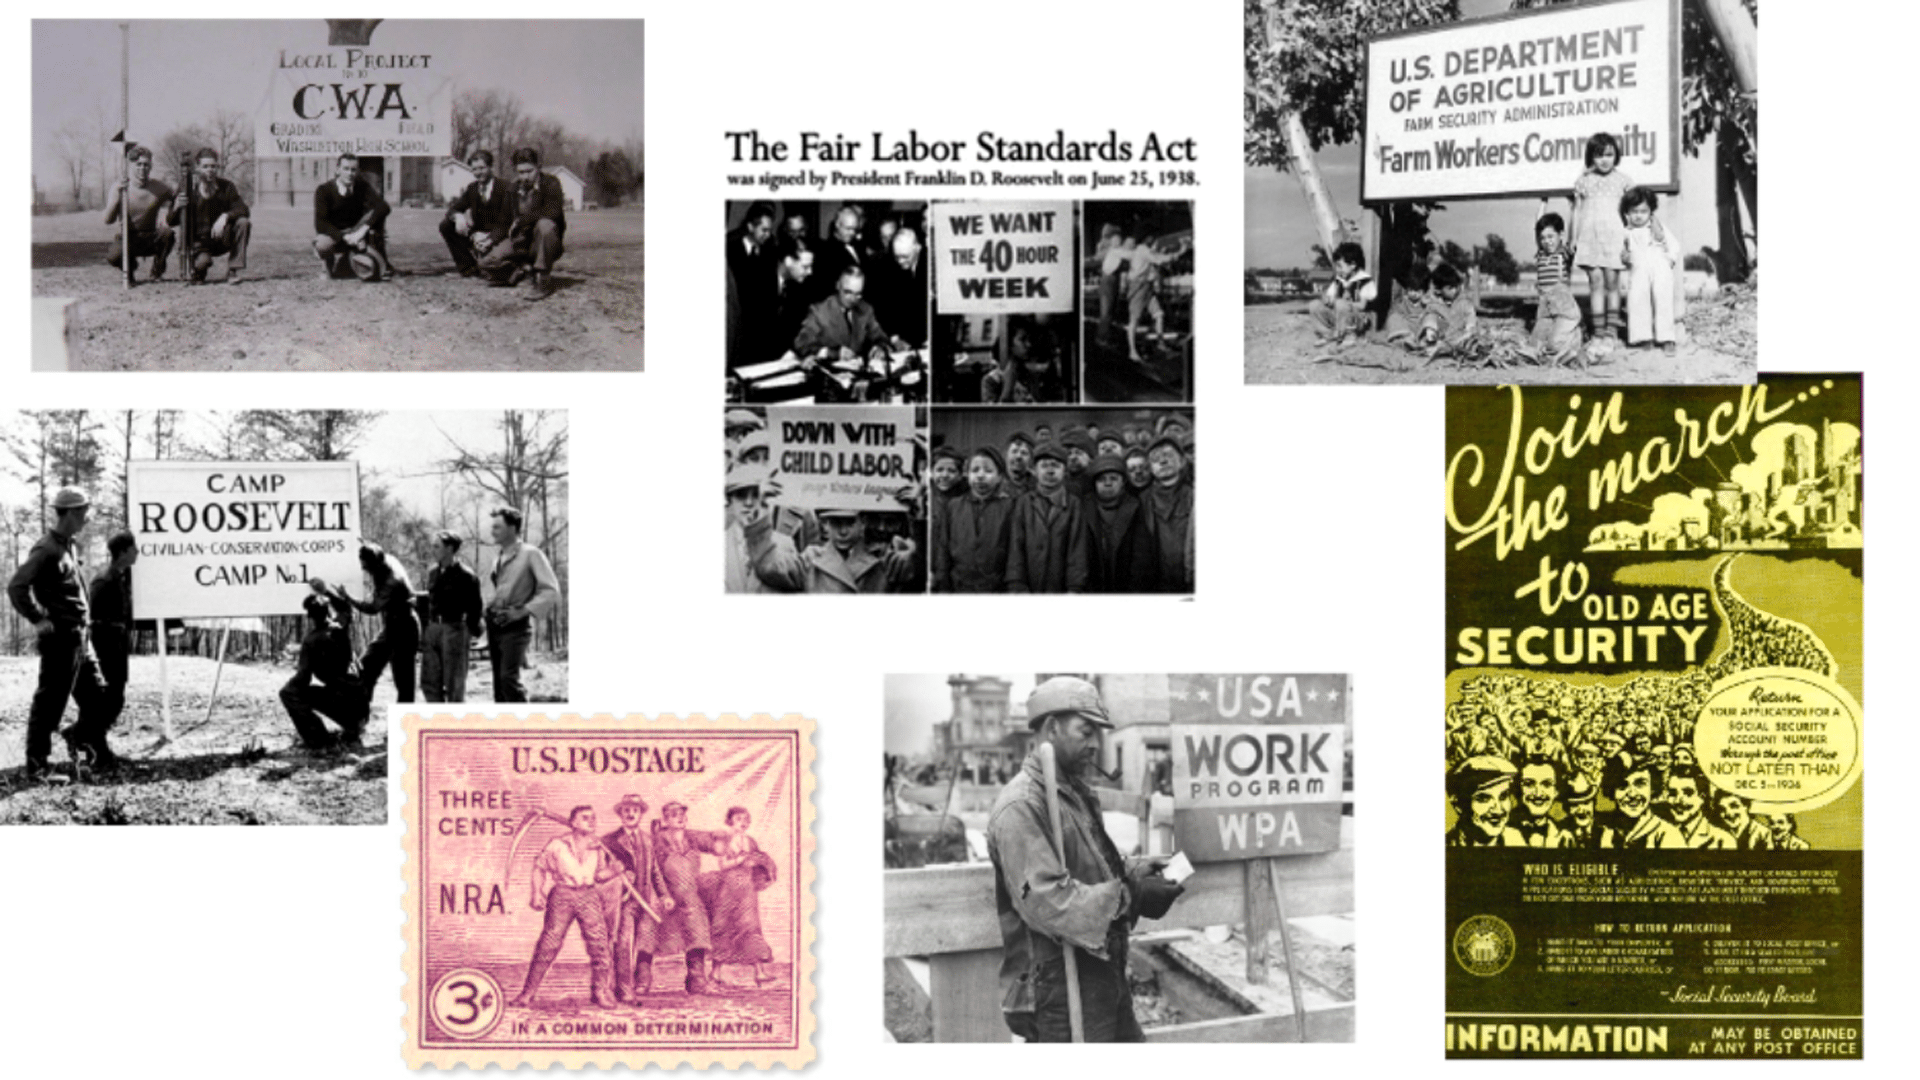 Collage of old photos and artwork promoting New Deal programs